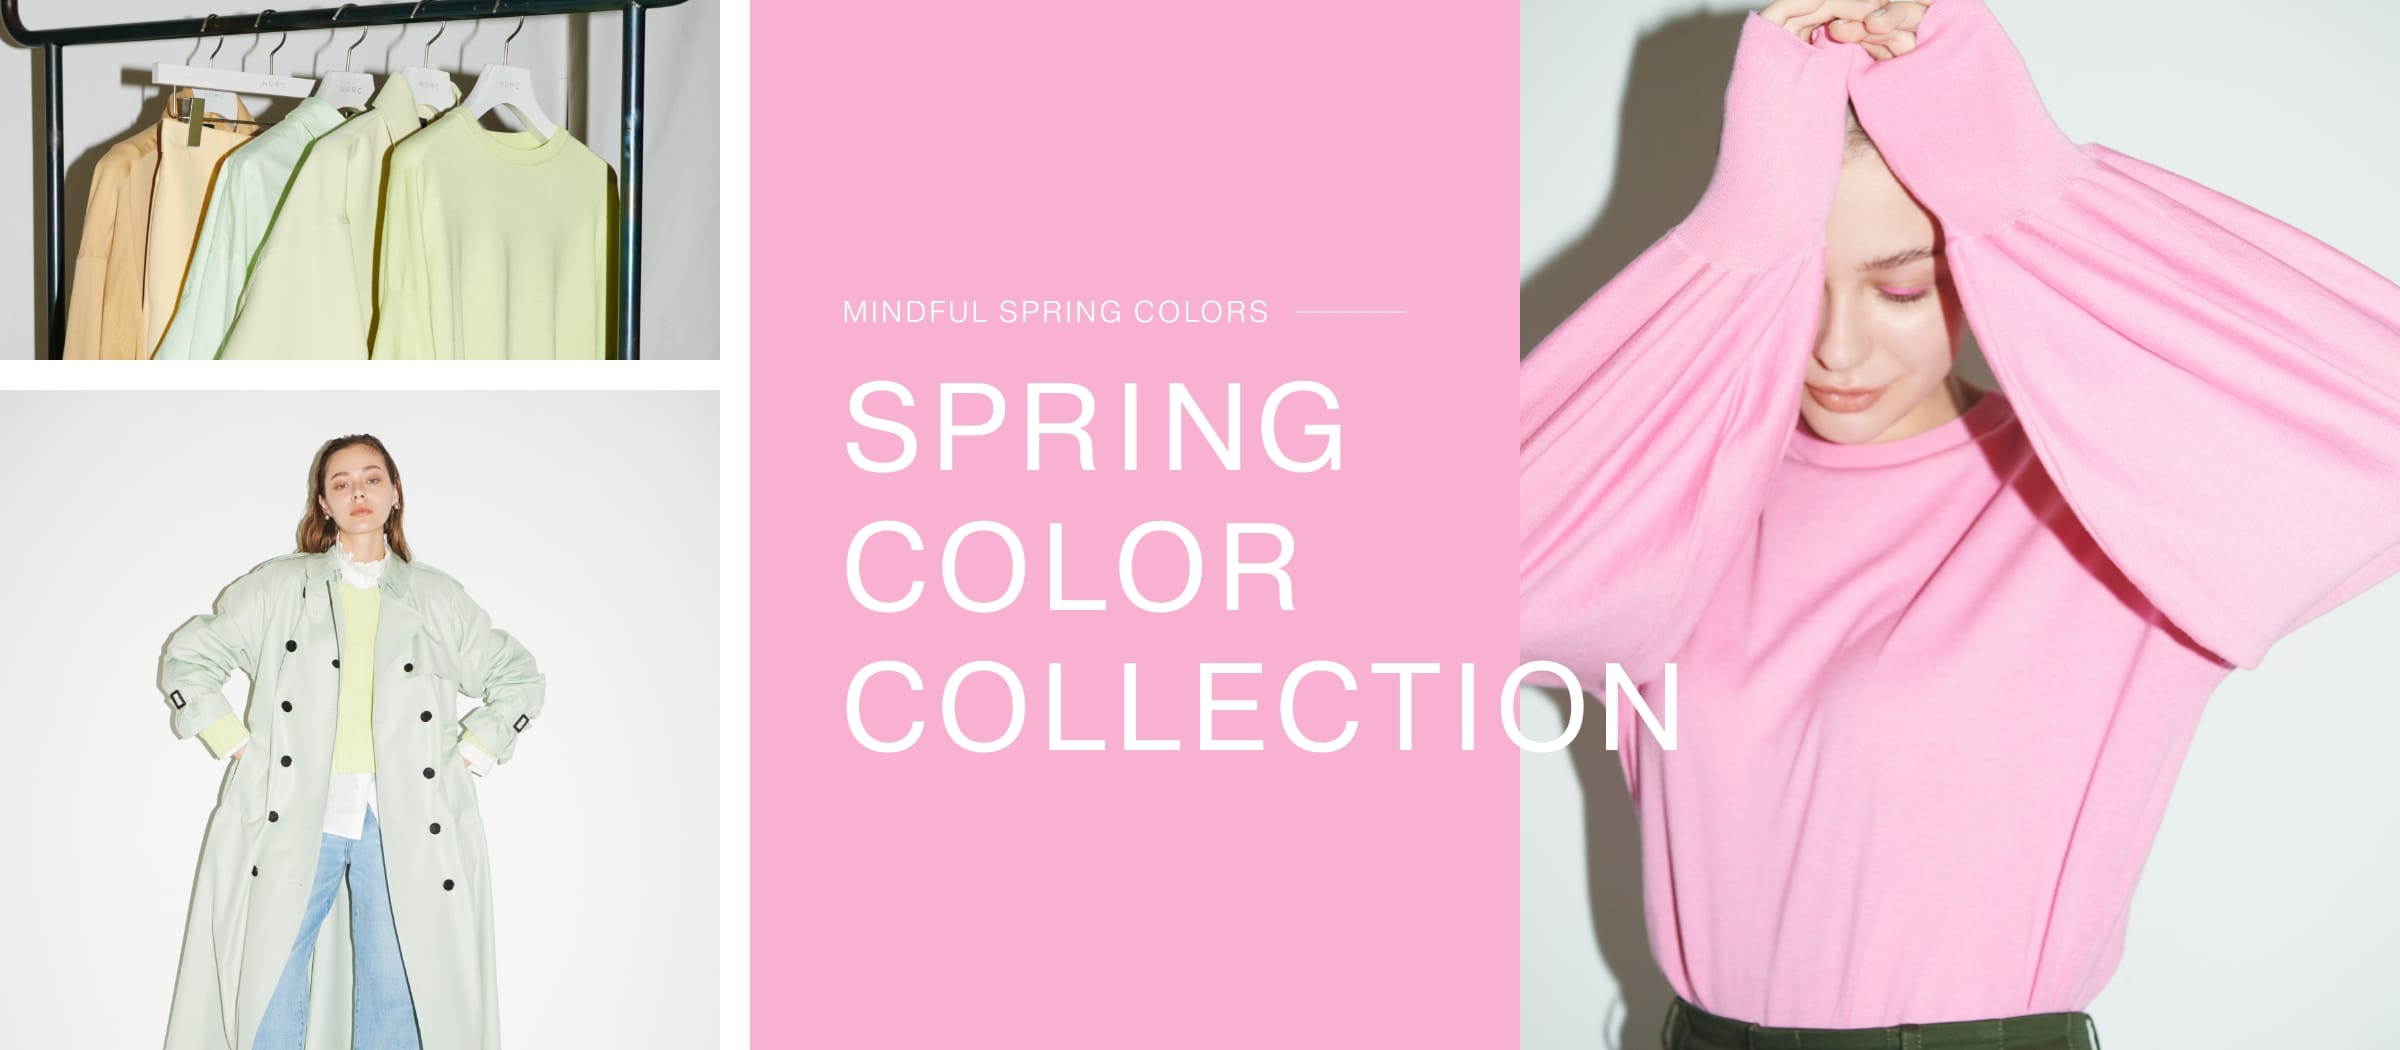 MINDFUL SPRING COLORS SPRING COLOR COLLECTION